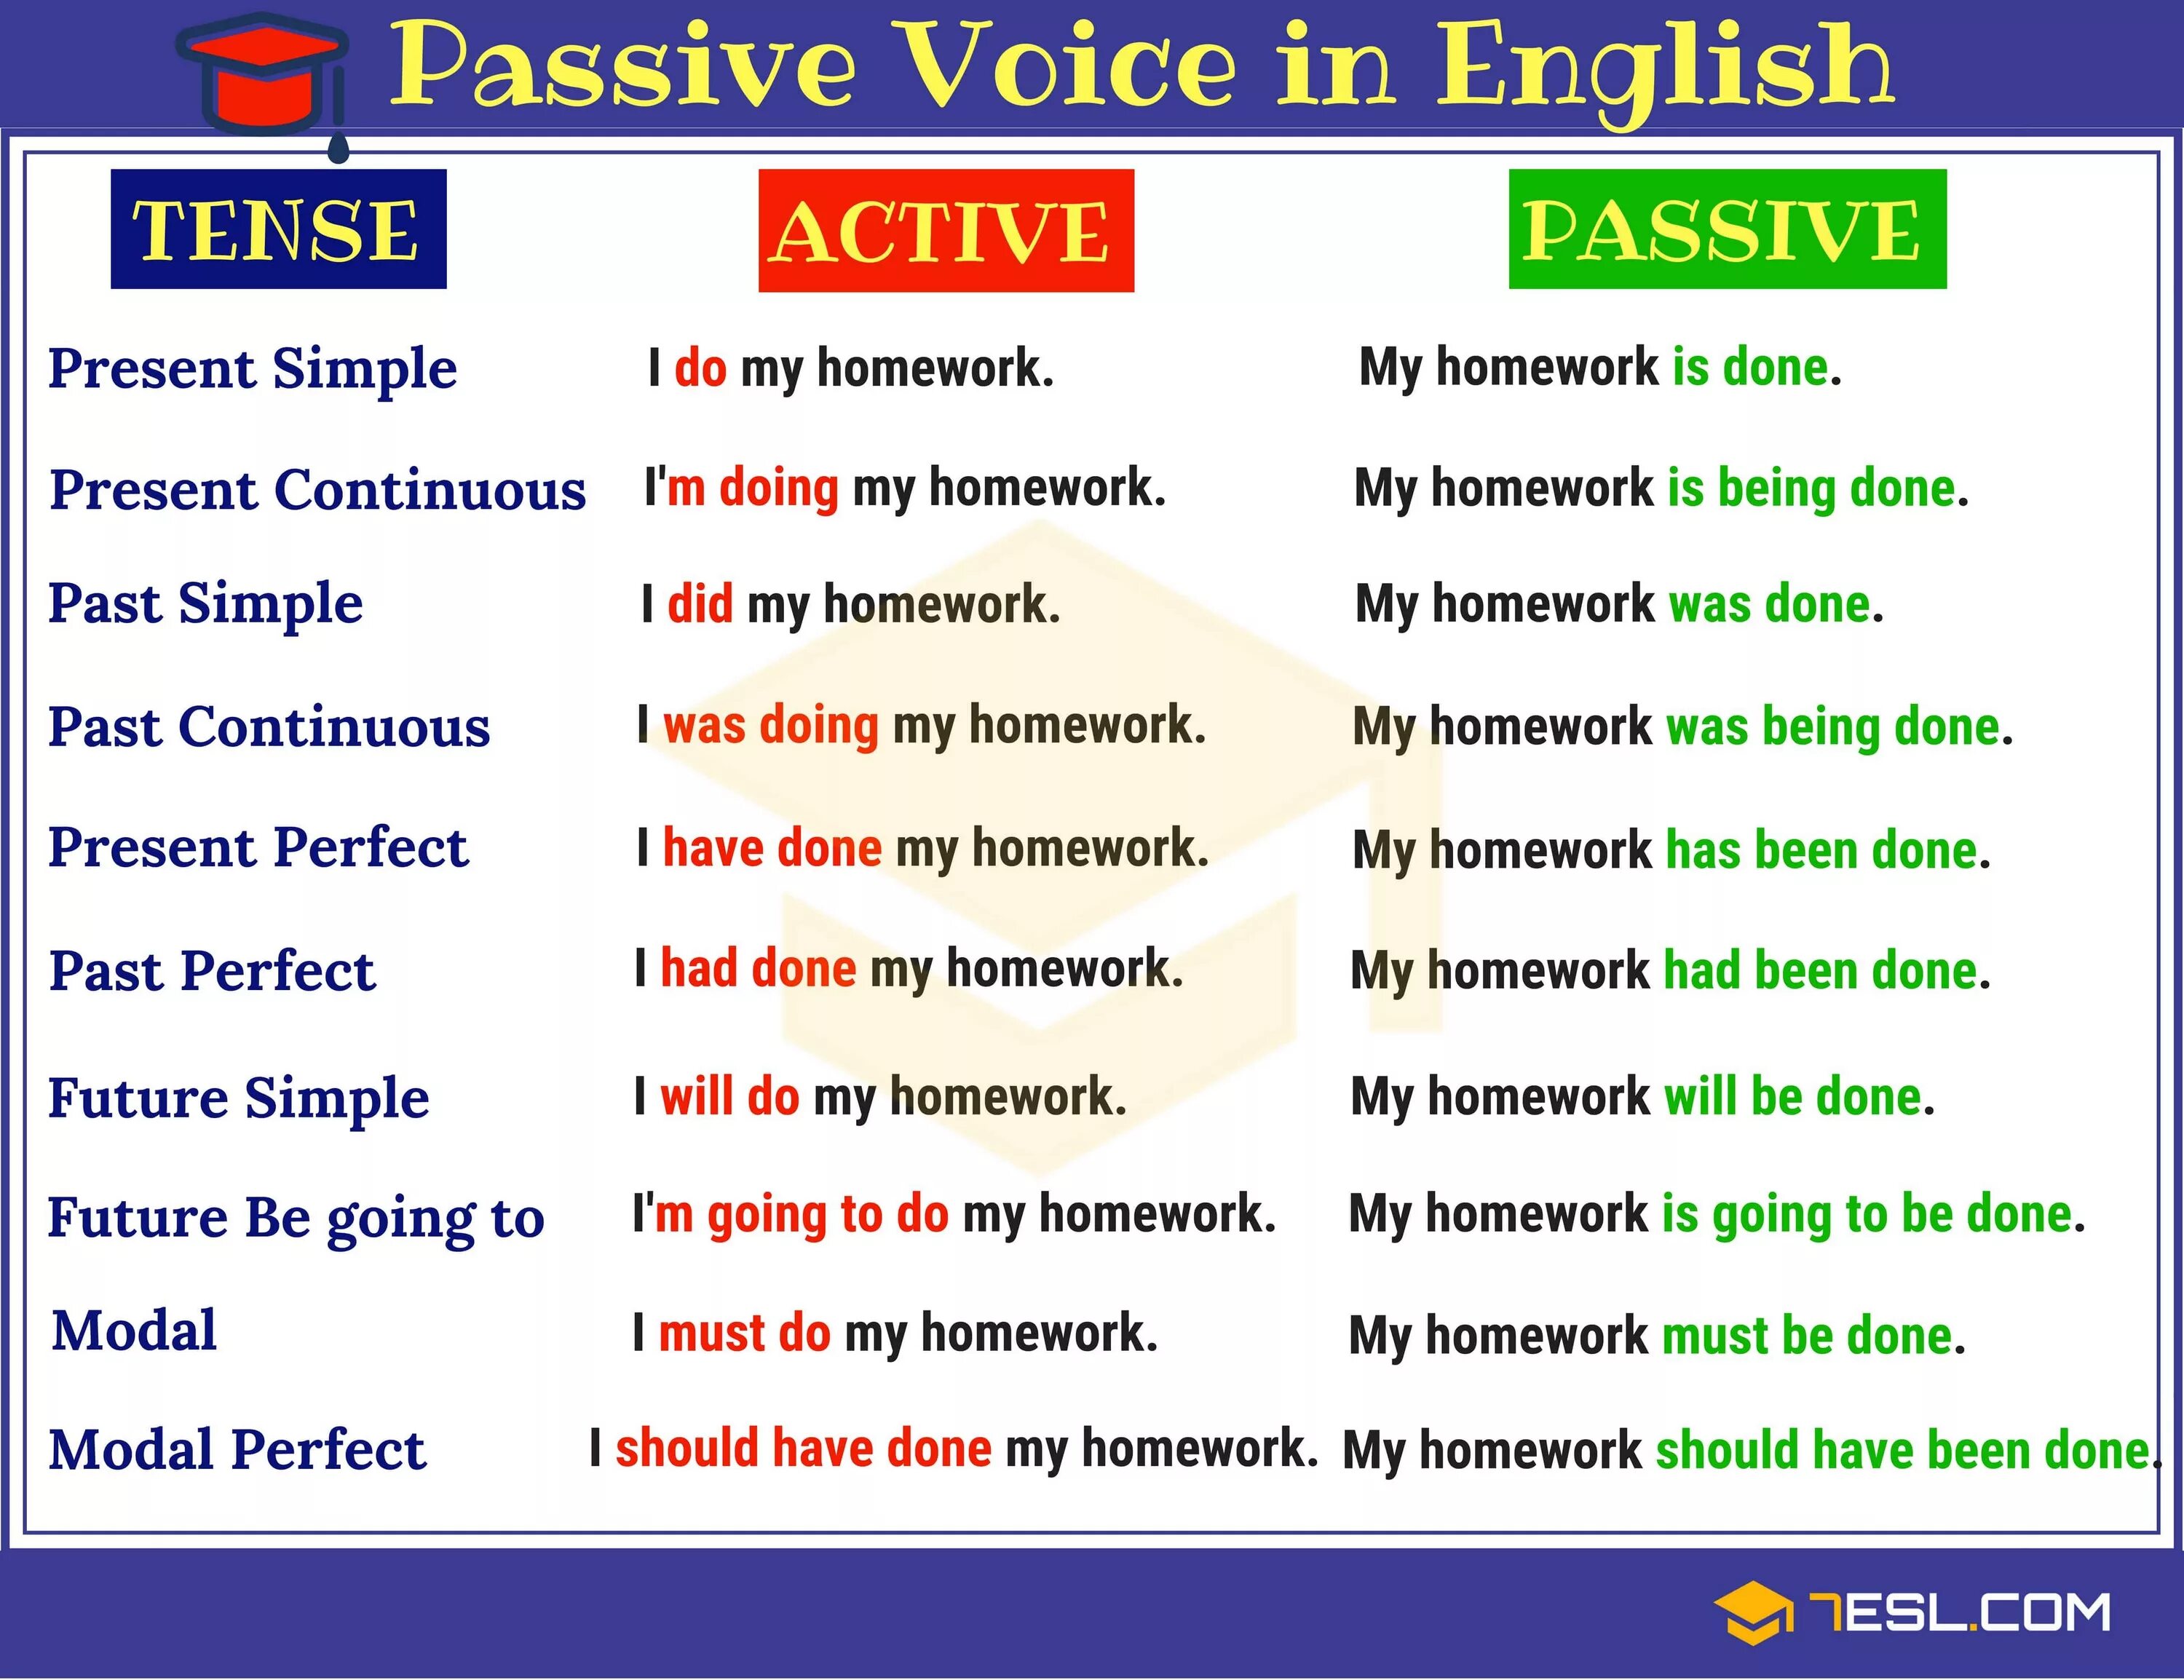 Was writing какое время. Active and Passive Voice in English Grammar. English Tenses Active and Passive. Active Passive Voice в английском языке. English Tenses Passive Voice.